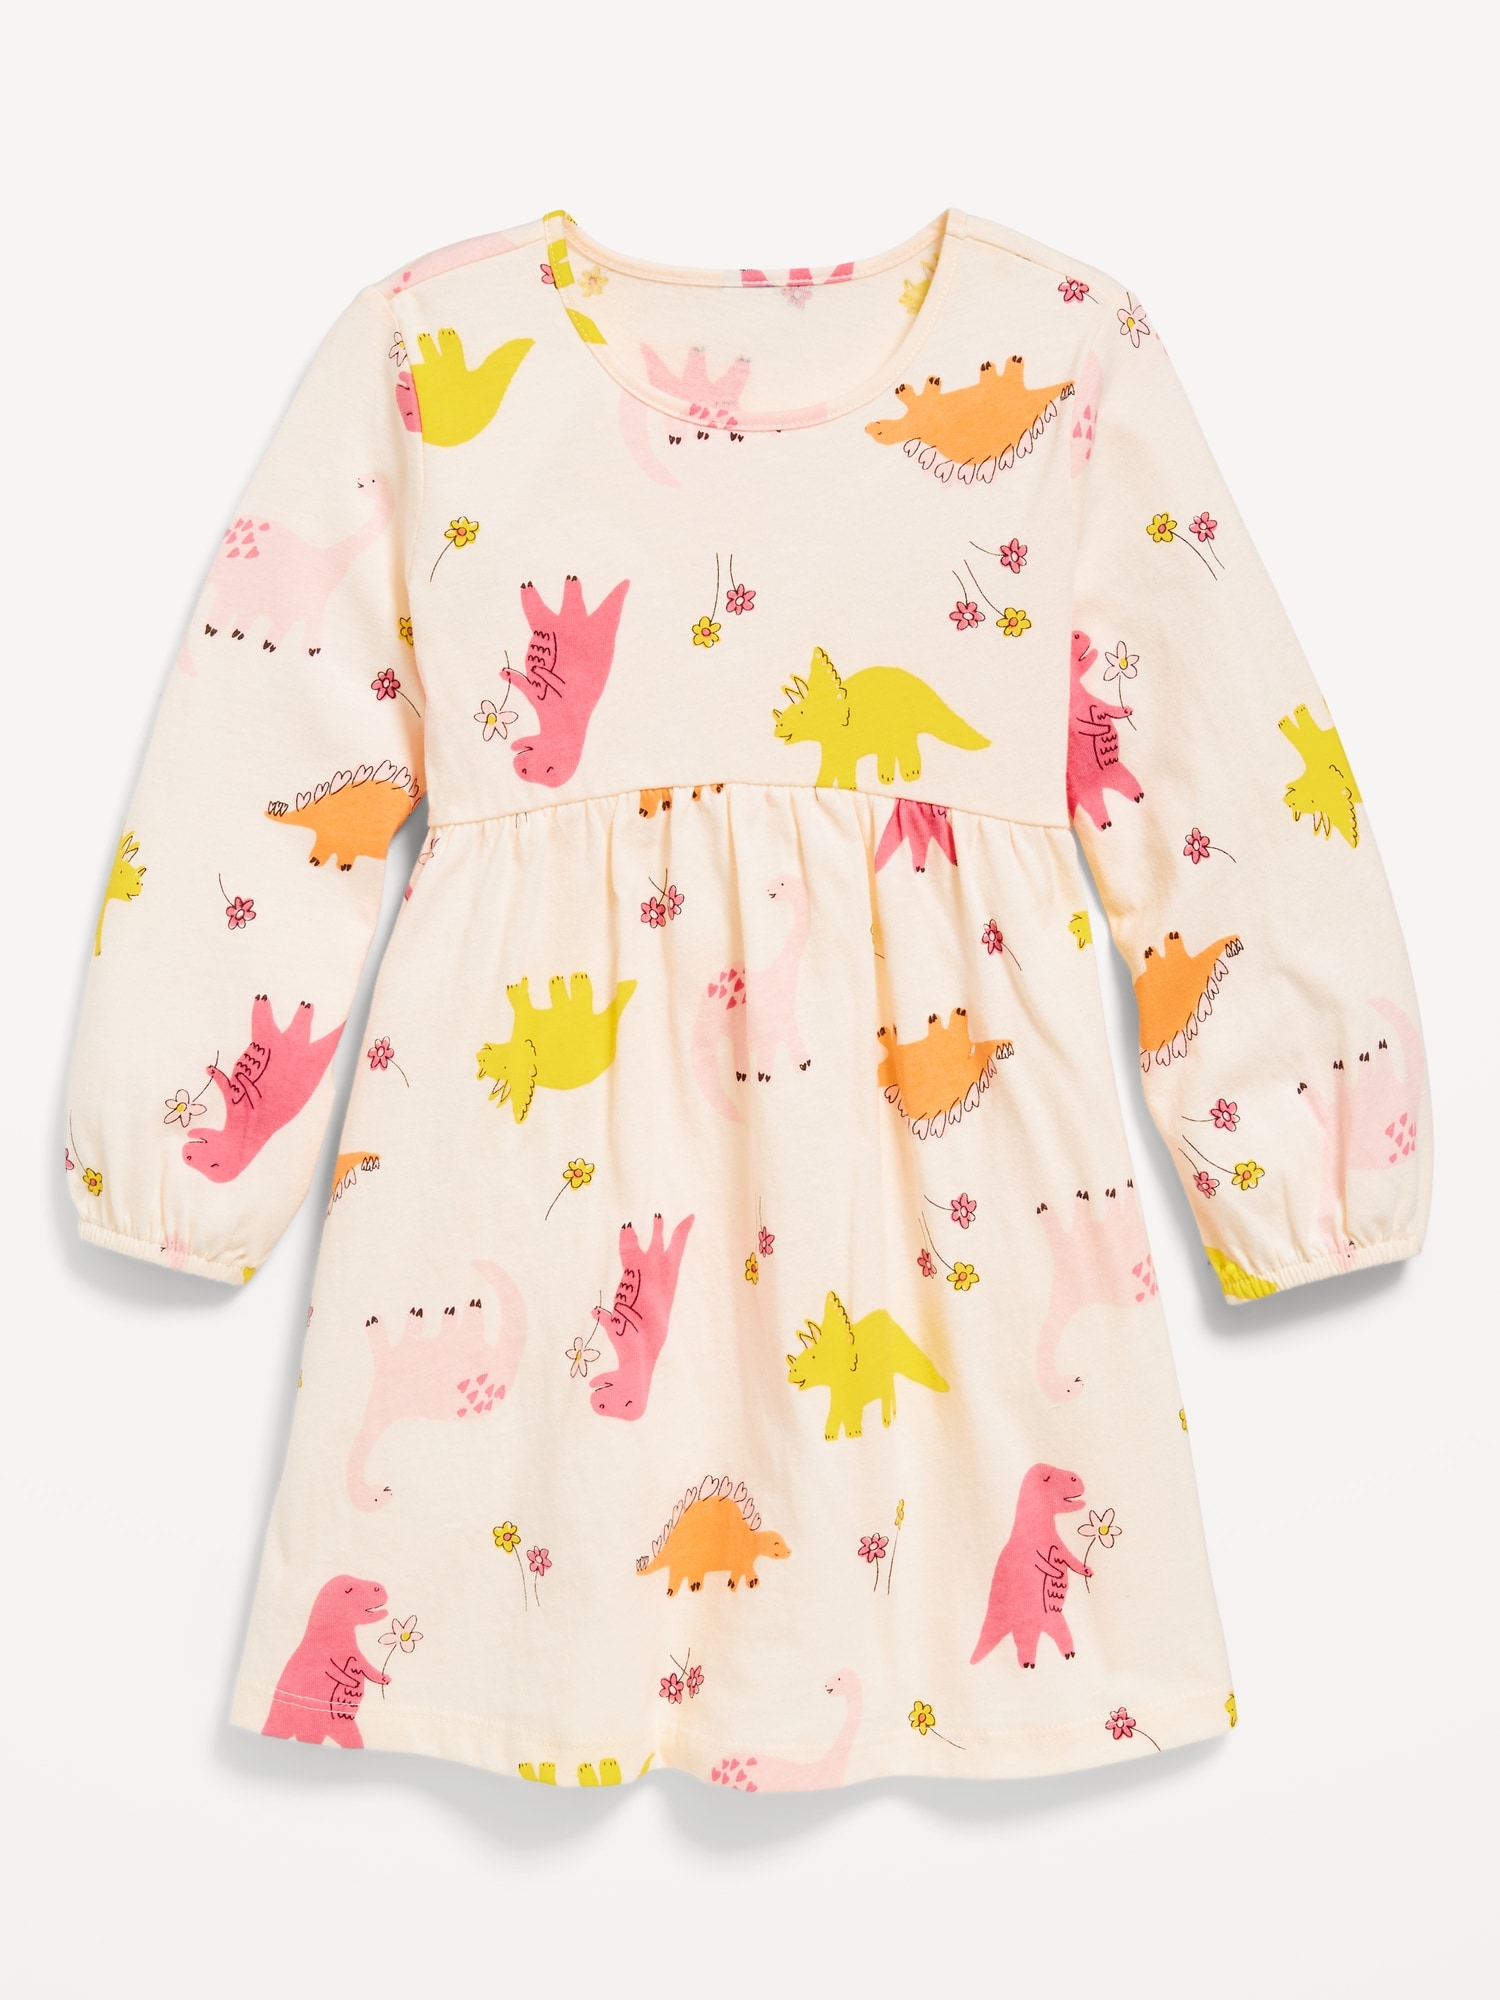 Printed Jersey-Knit Long-Sleeve Dress for Toddler Girls